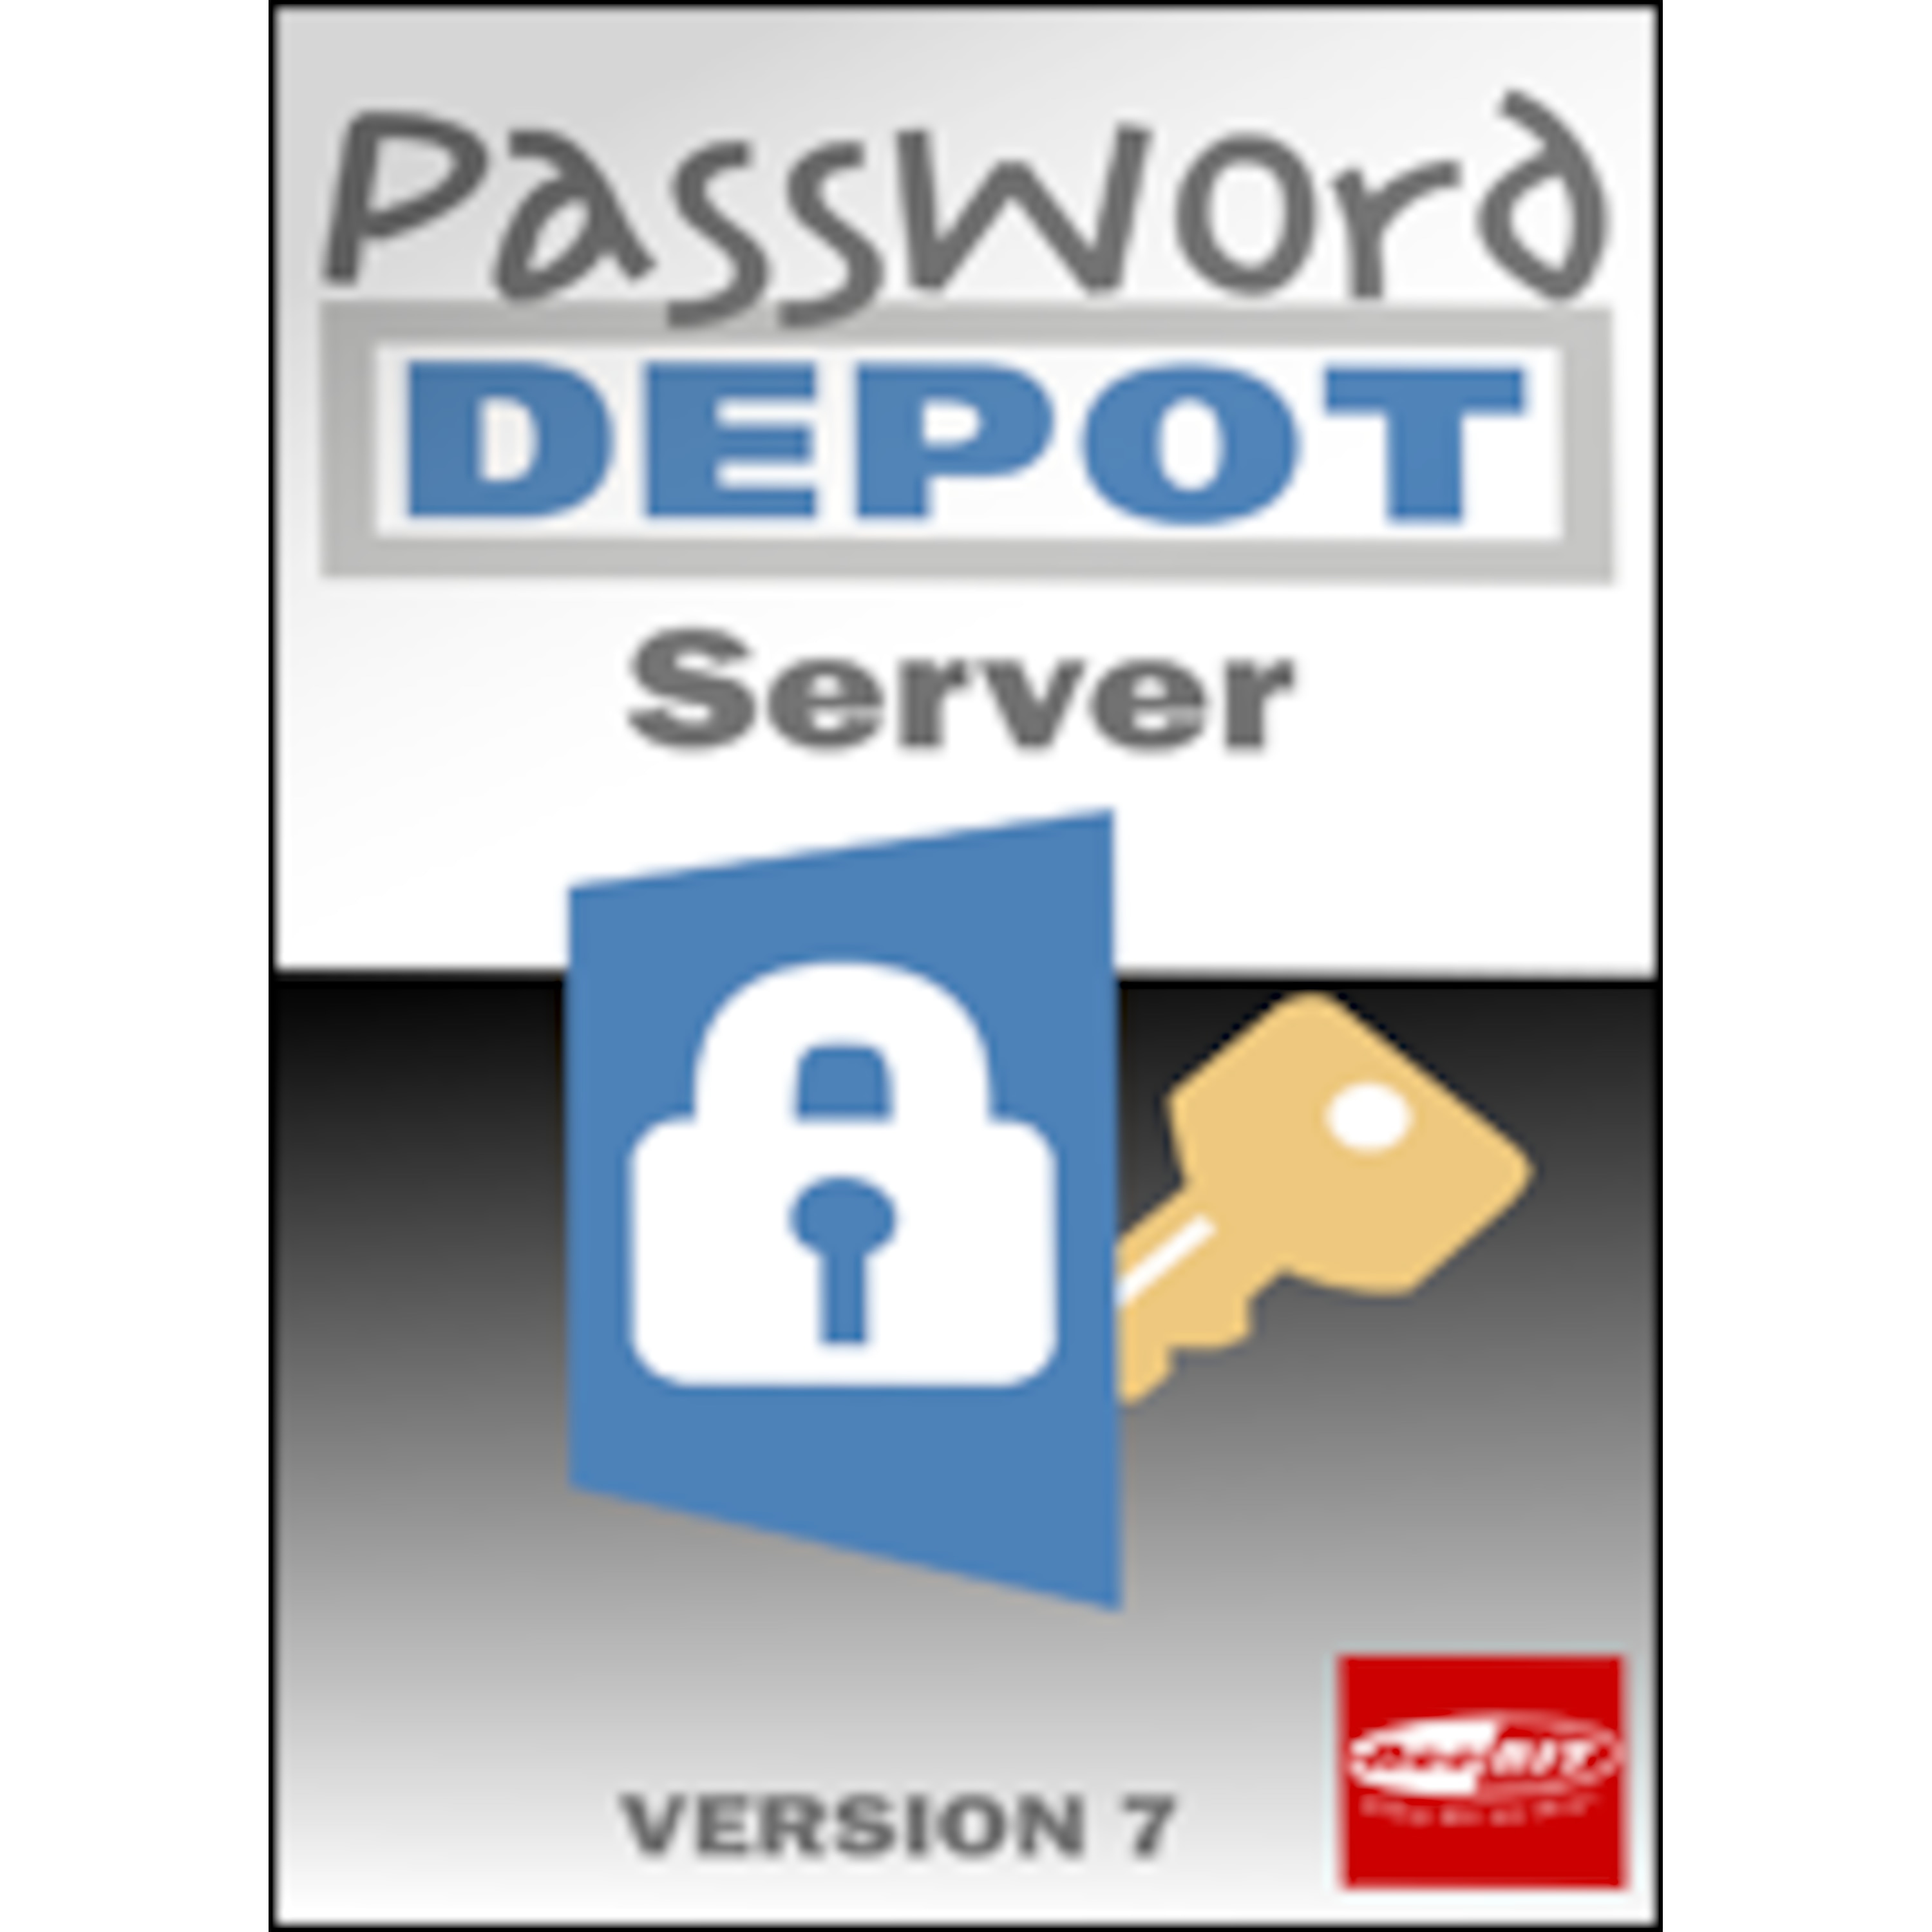 download the last version for android Password Depot 17.2.0